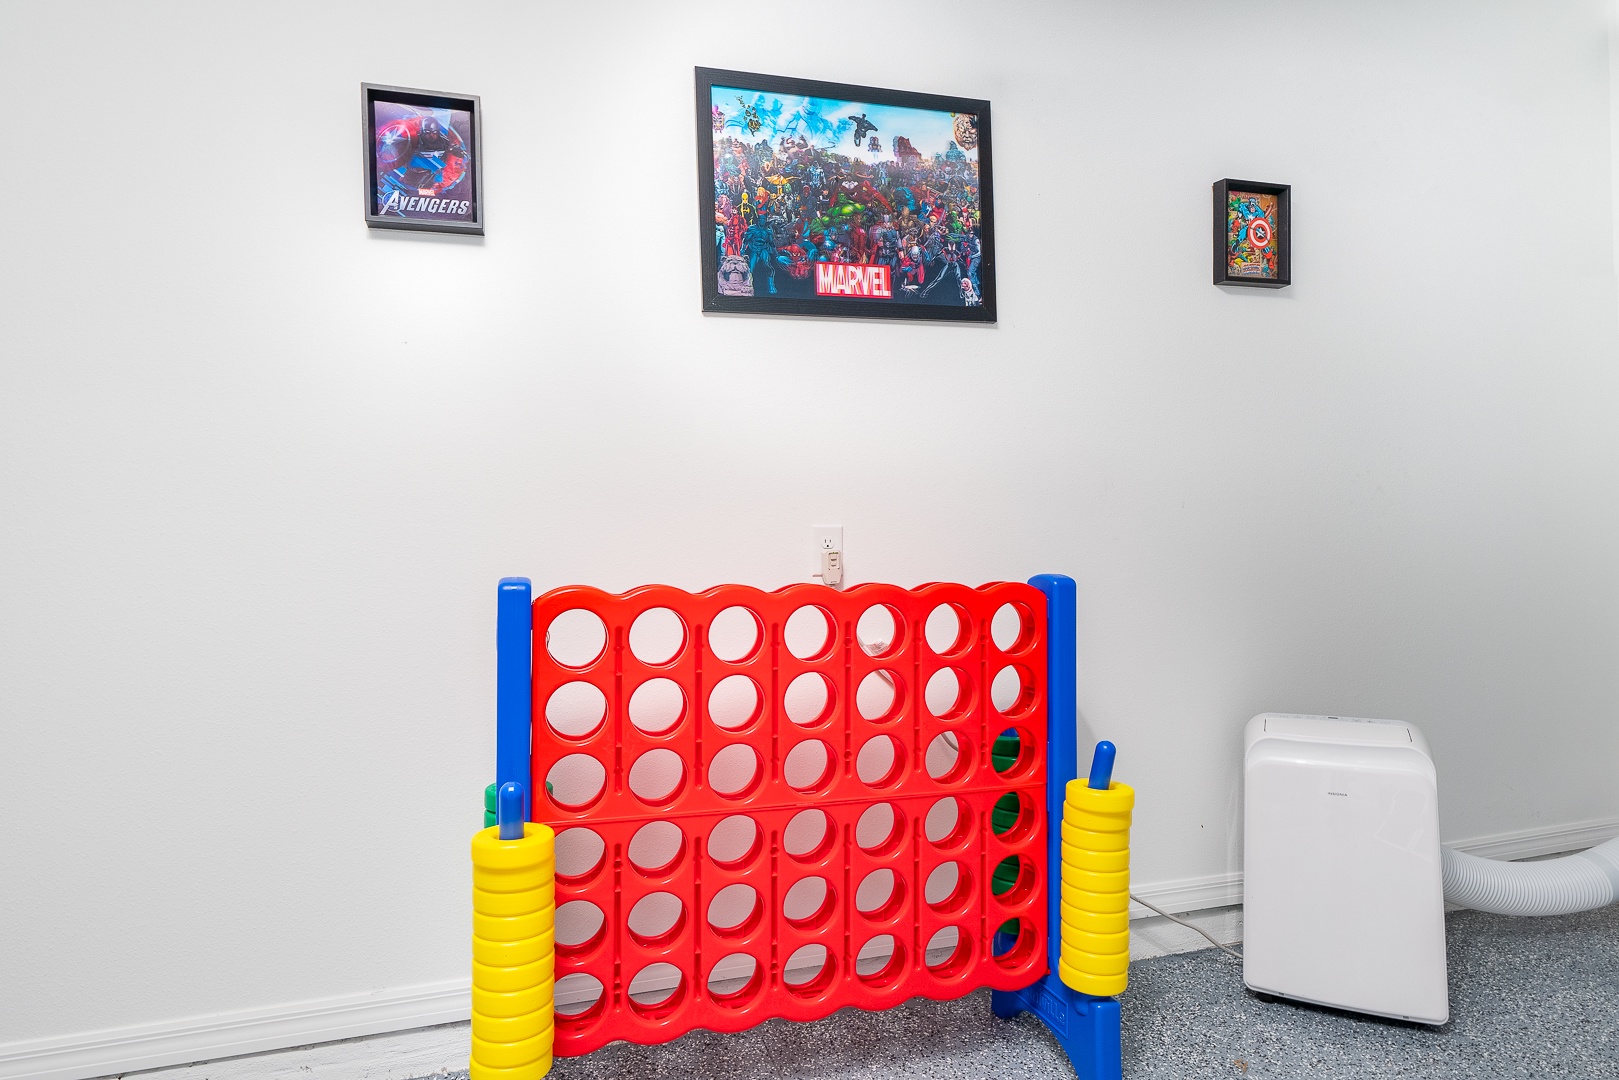 Head into the garage game room & unleash your competitive side